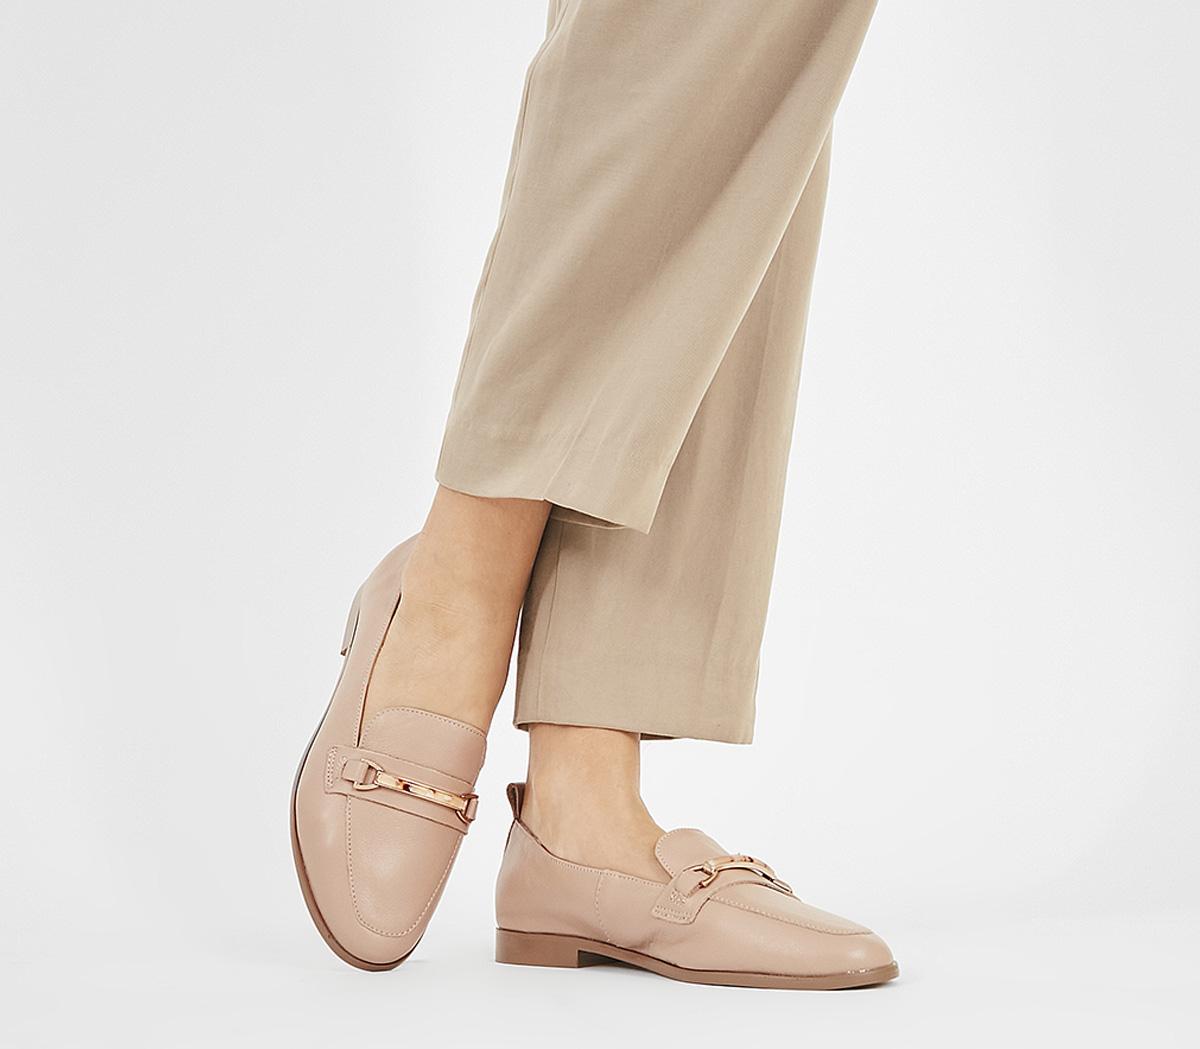 OFFICEFew Feature Trim LoafersBeige Leather